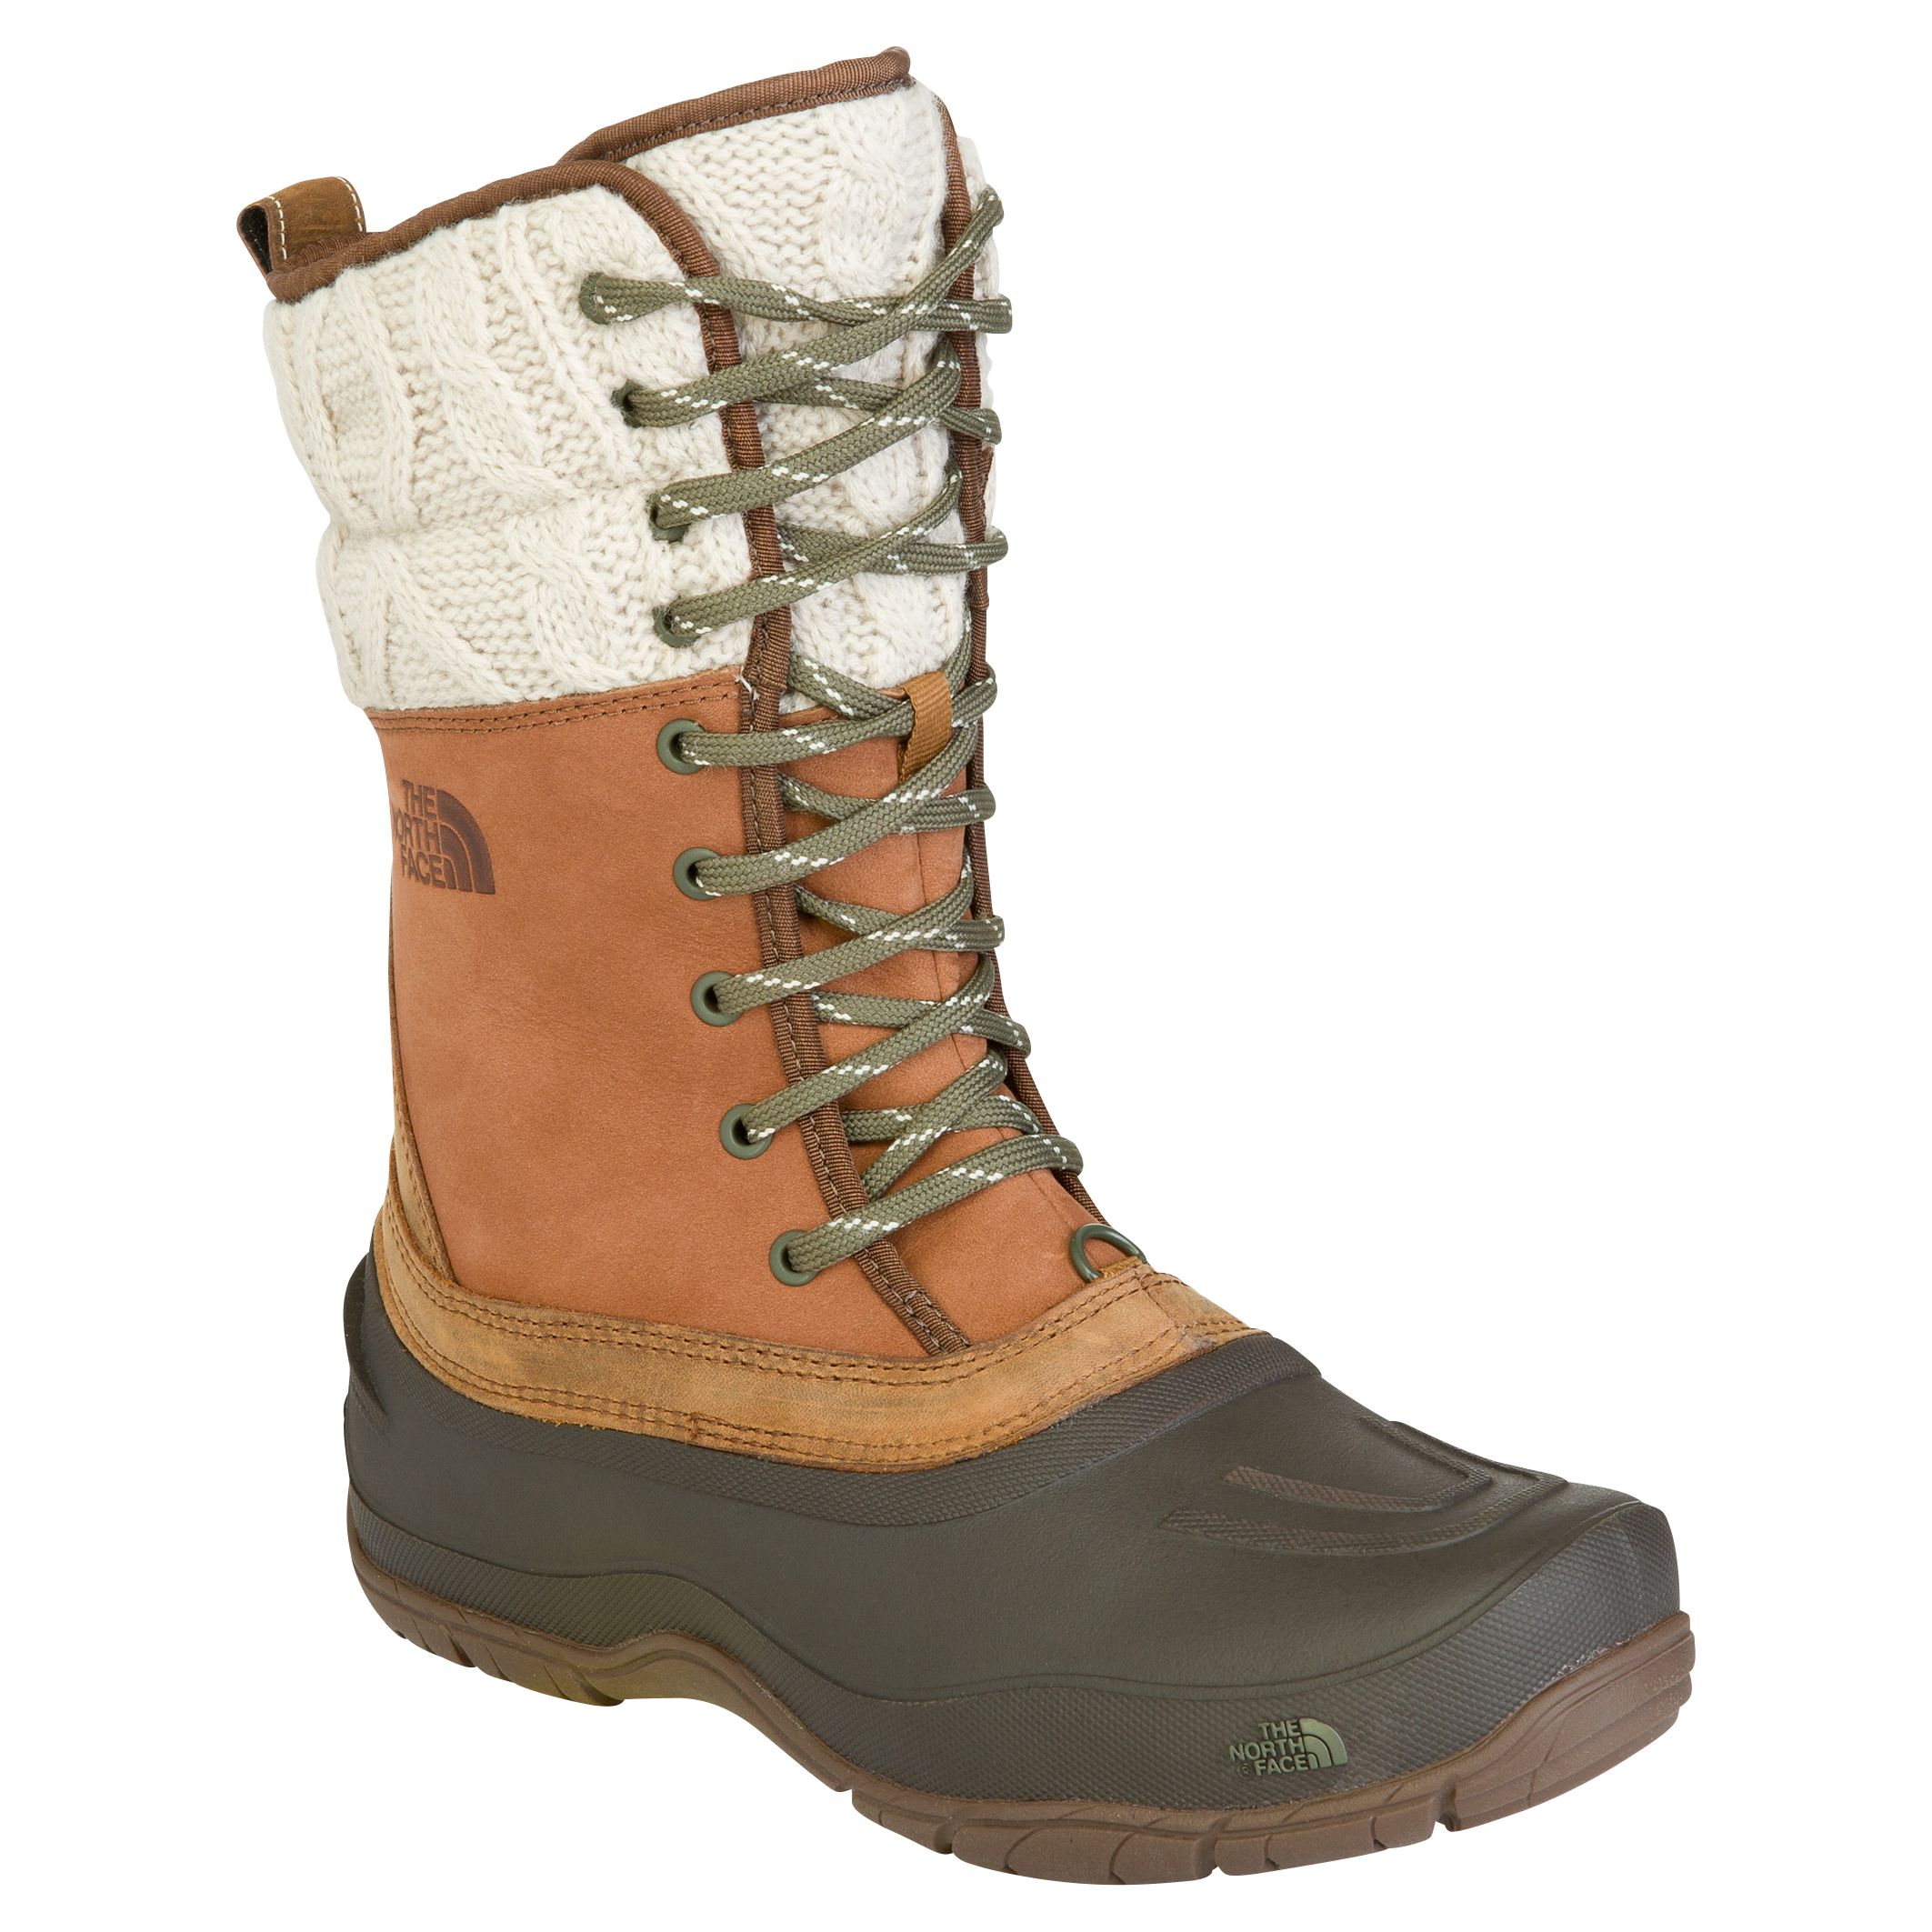 The North Face Women's Shellista Lace Leather Snow Boots, Brown